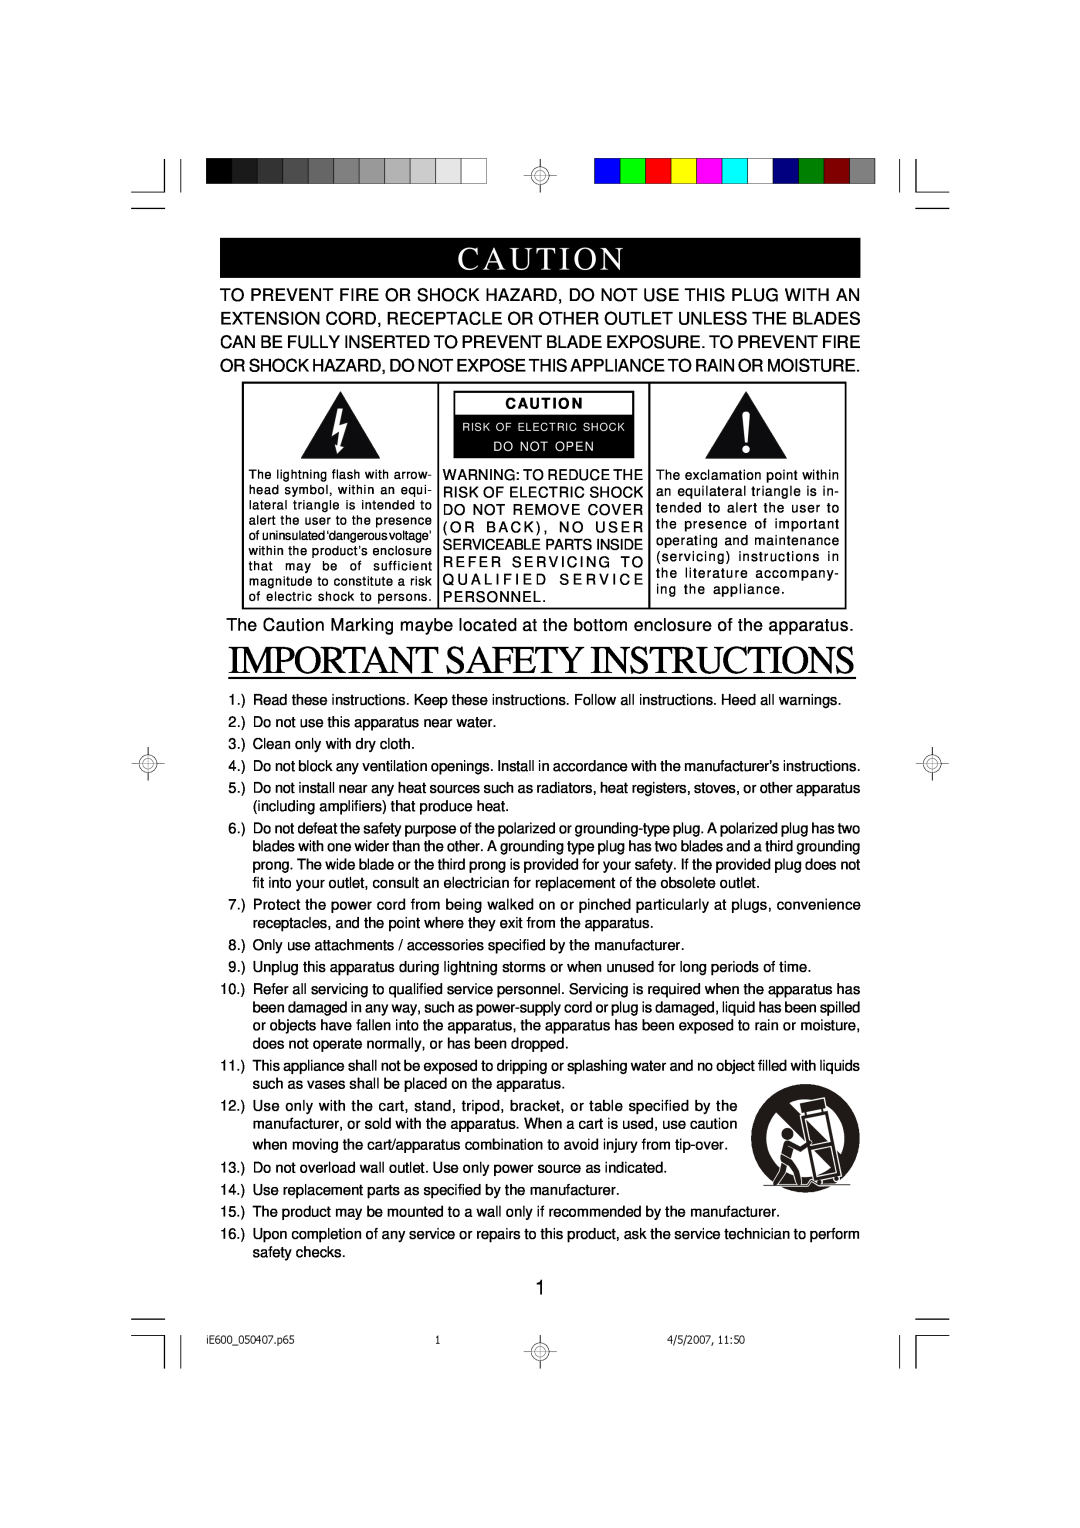 Emerson iE600 owner manual Important Safety Instructions, Caut I On, Caut I O N 